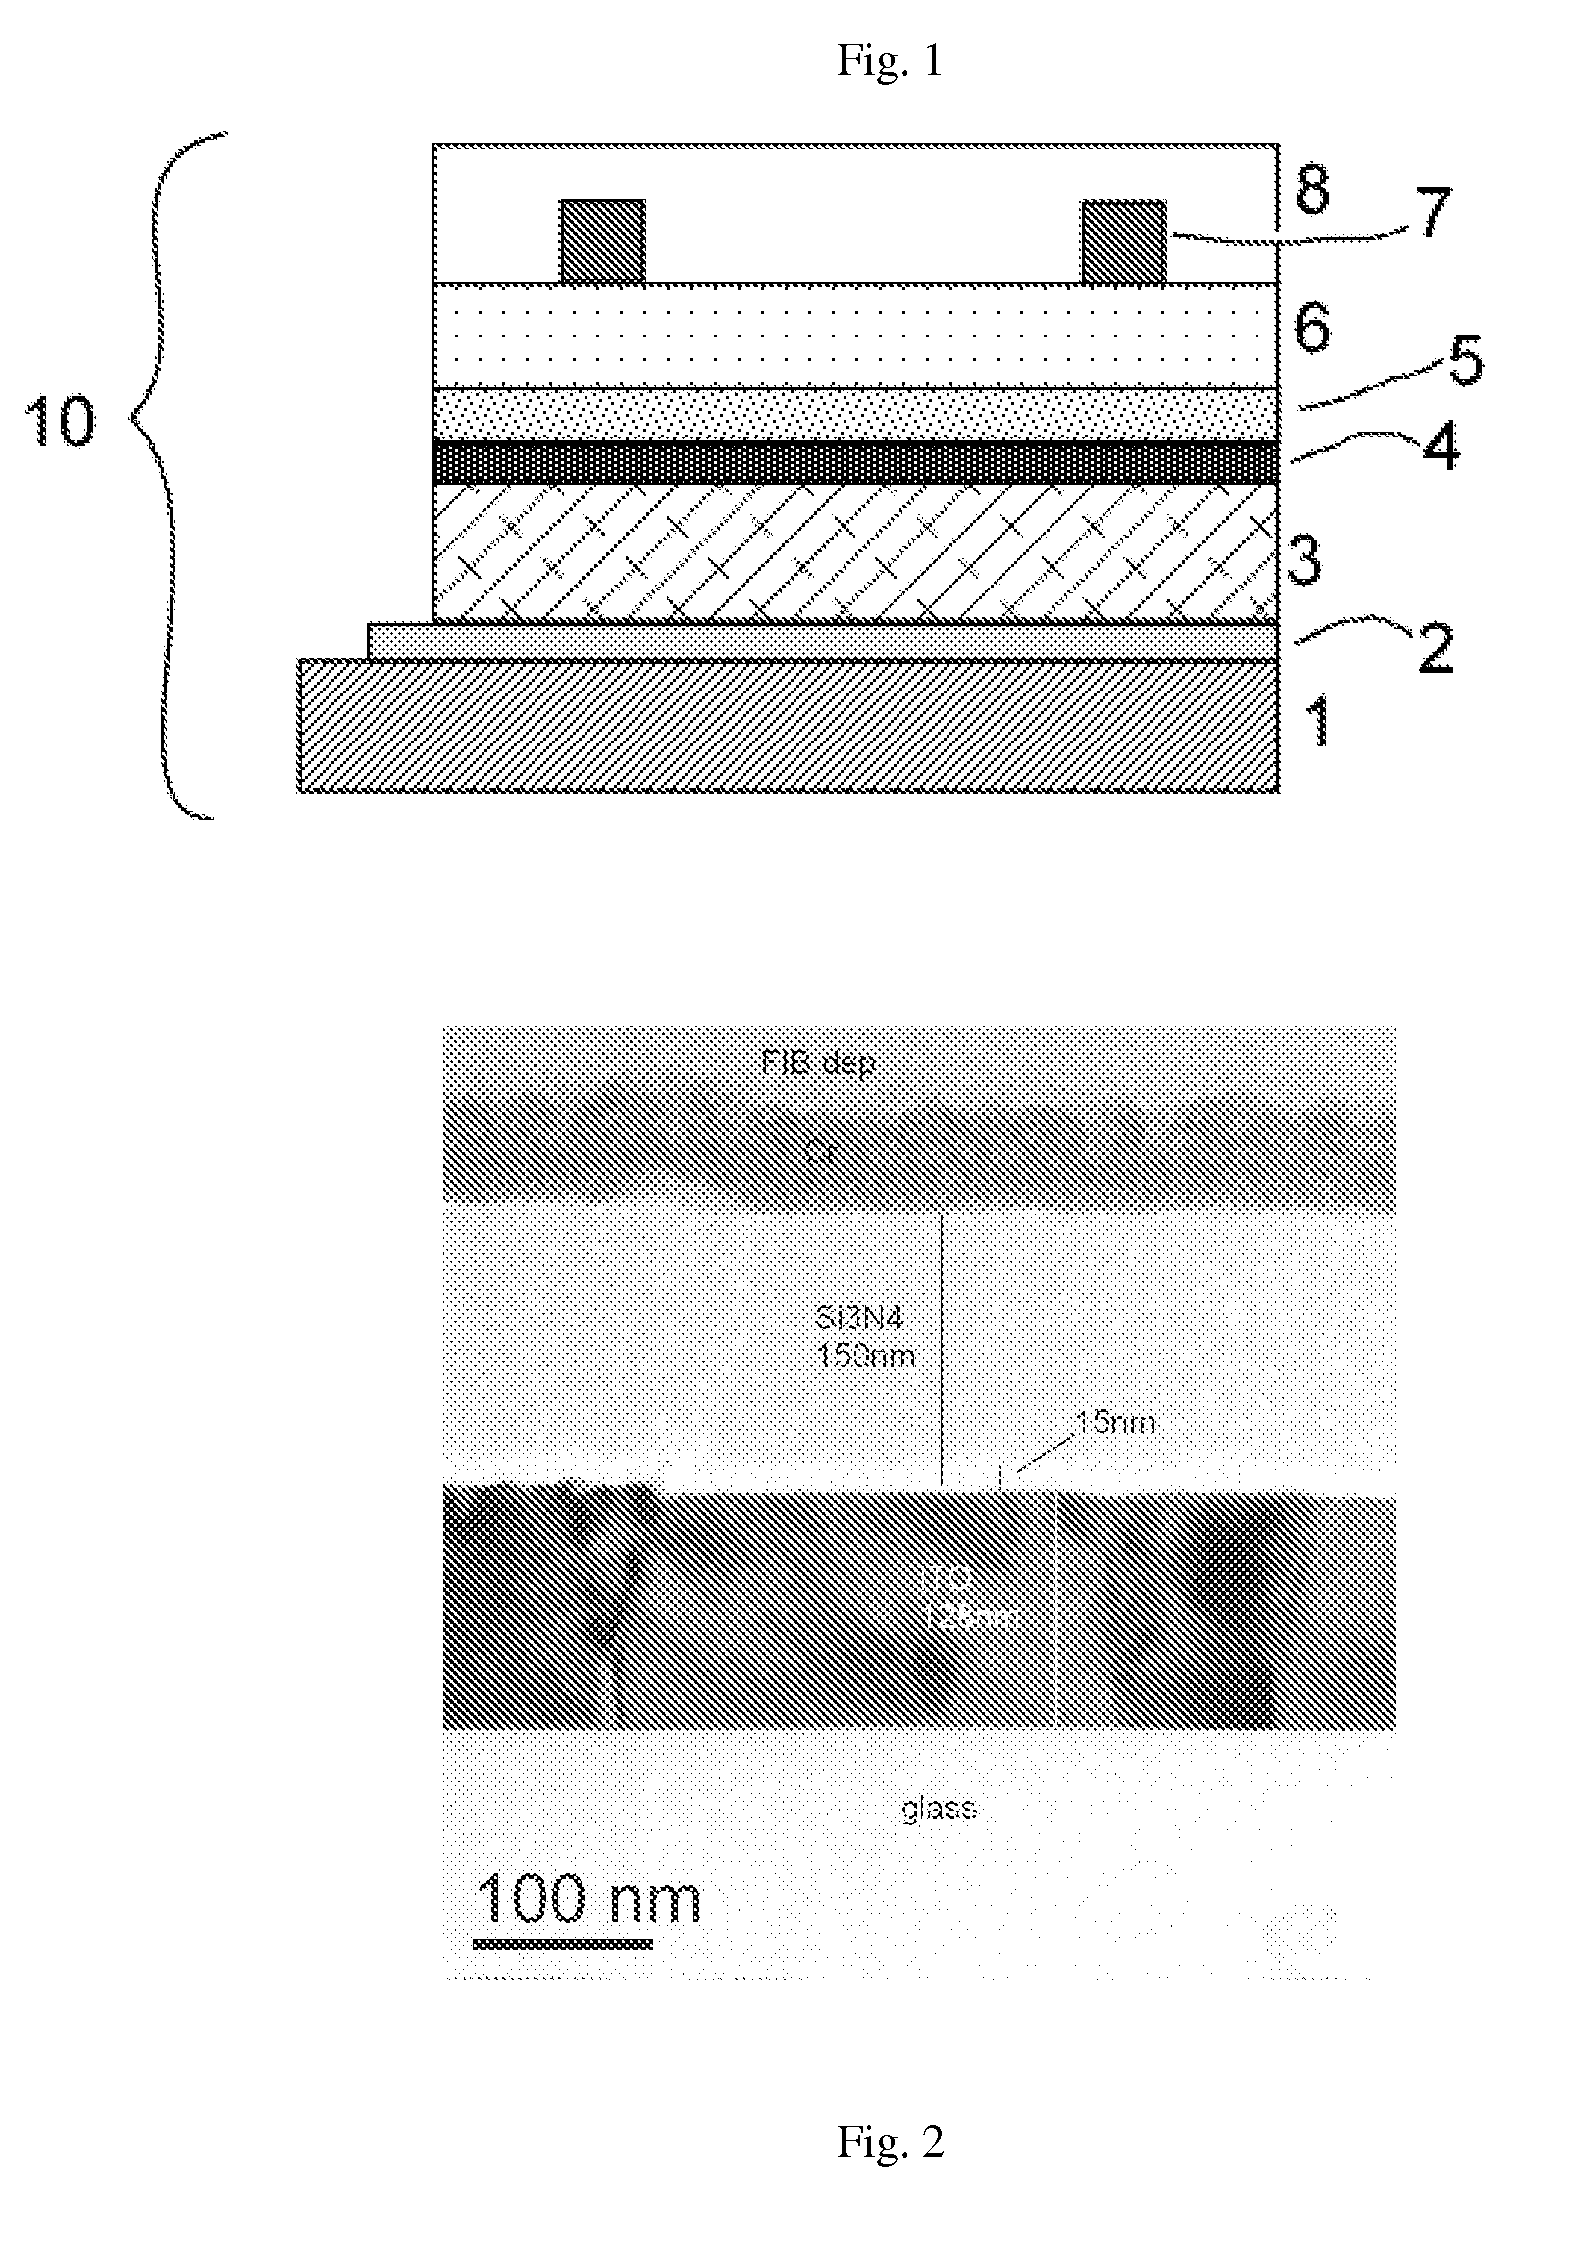 Method of forming a protective layer on thin-film photovoltaic articles and articles made with such a layer